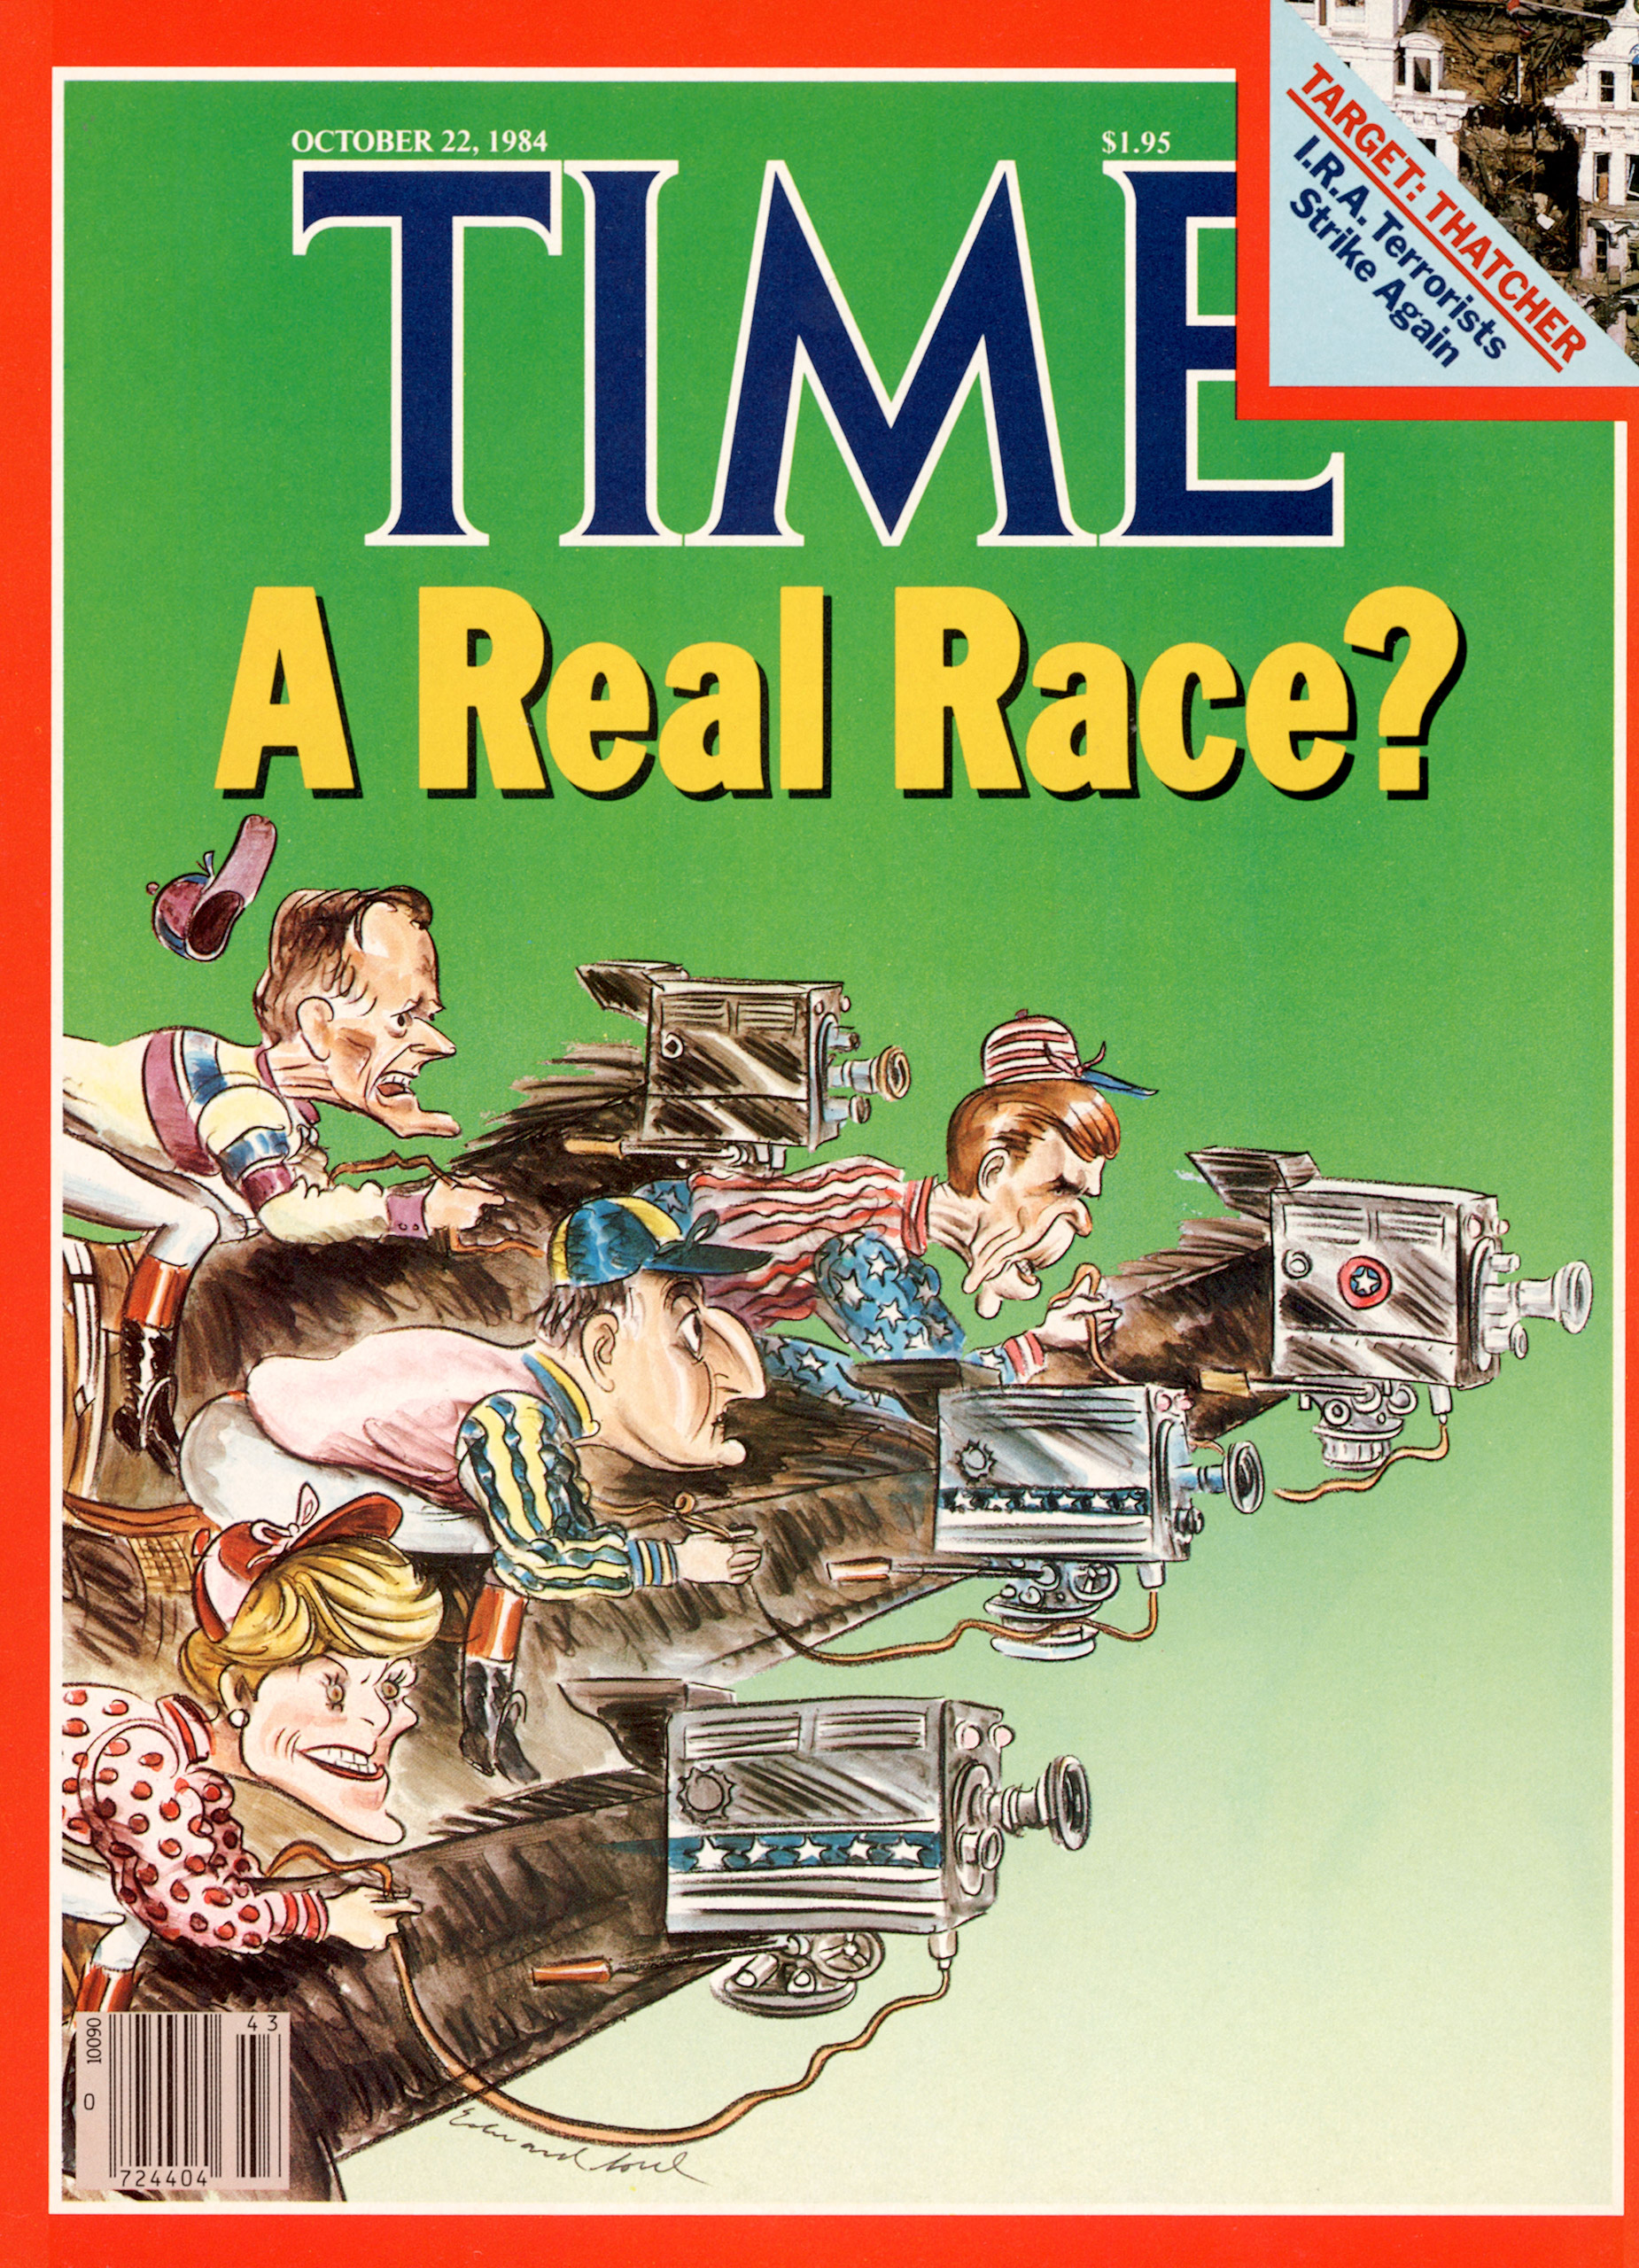 George H.W. Bush, top left, with Geraldine Ferraro, Walter Mondale and Ronald Reagan, on the Oct. 22, 1984, cover of TIME. Illustration by Edward Sorel.